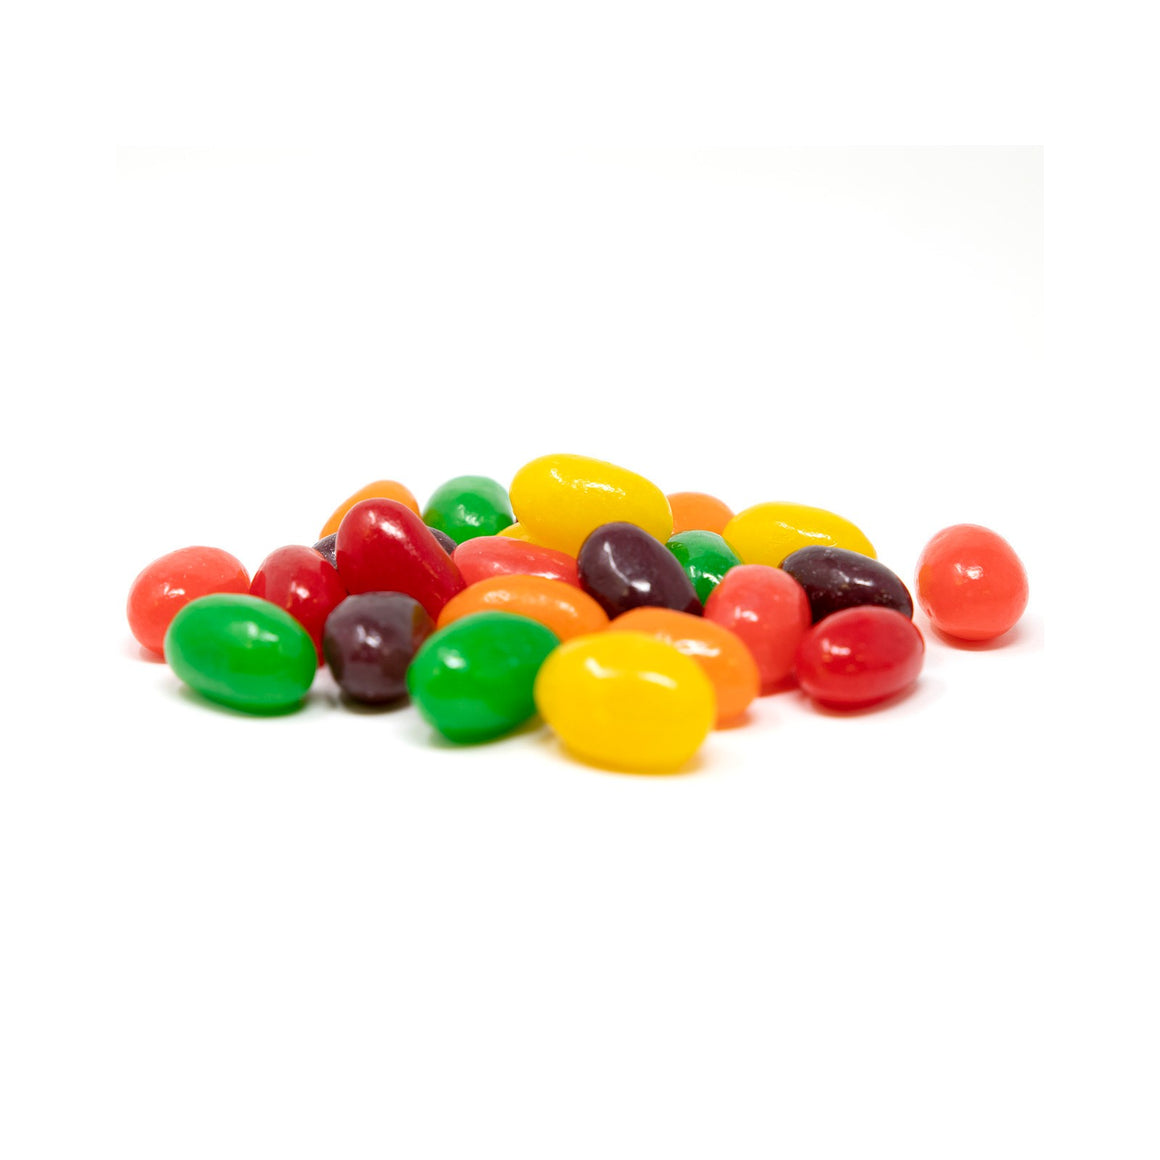 All City Candy Jumbo Assorted Jelly Beans - Bulk Bags Bulk Unwrapped Canel's For fresh candy and great service, visit www.allcitycandy.com